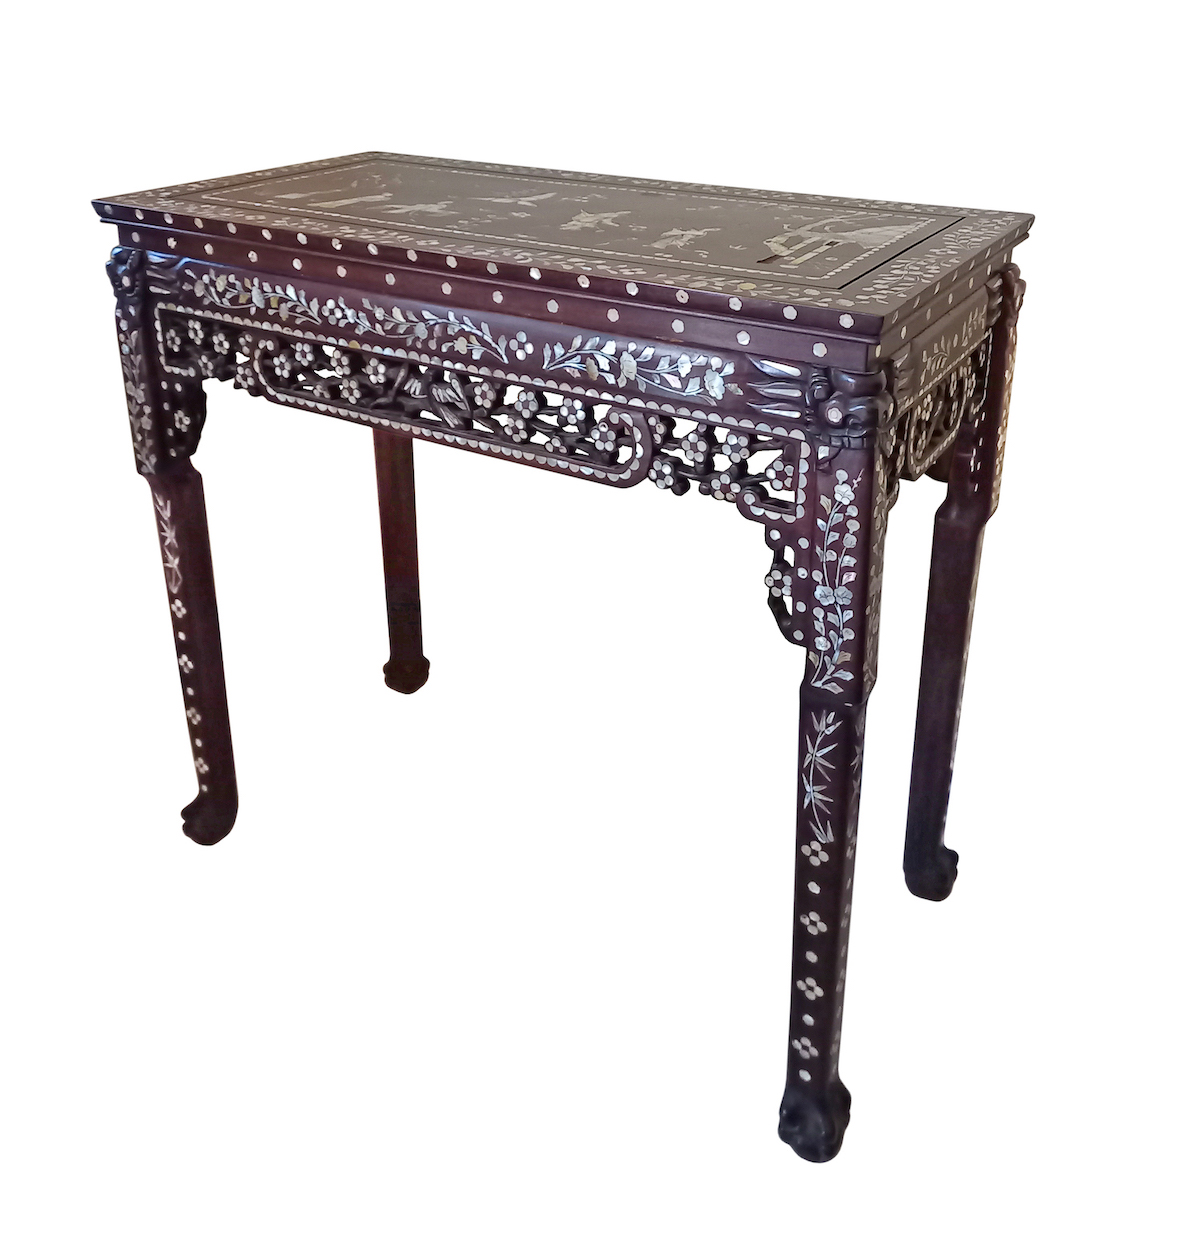 A vintage Vietnamese carved hardwood table decorated with mother of pearl inlay